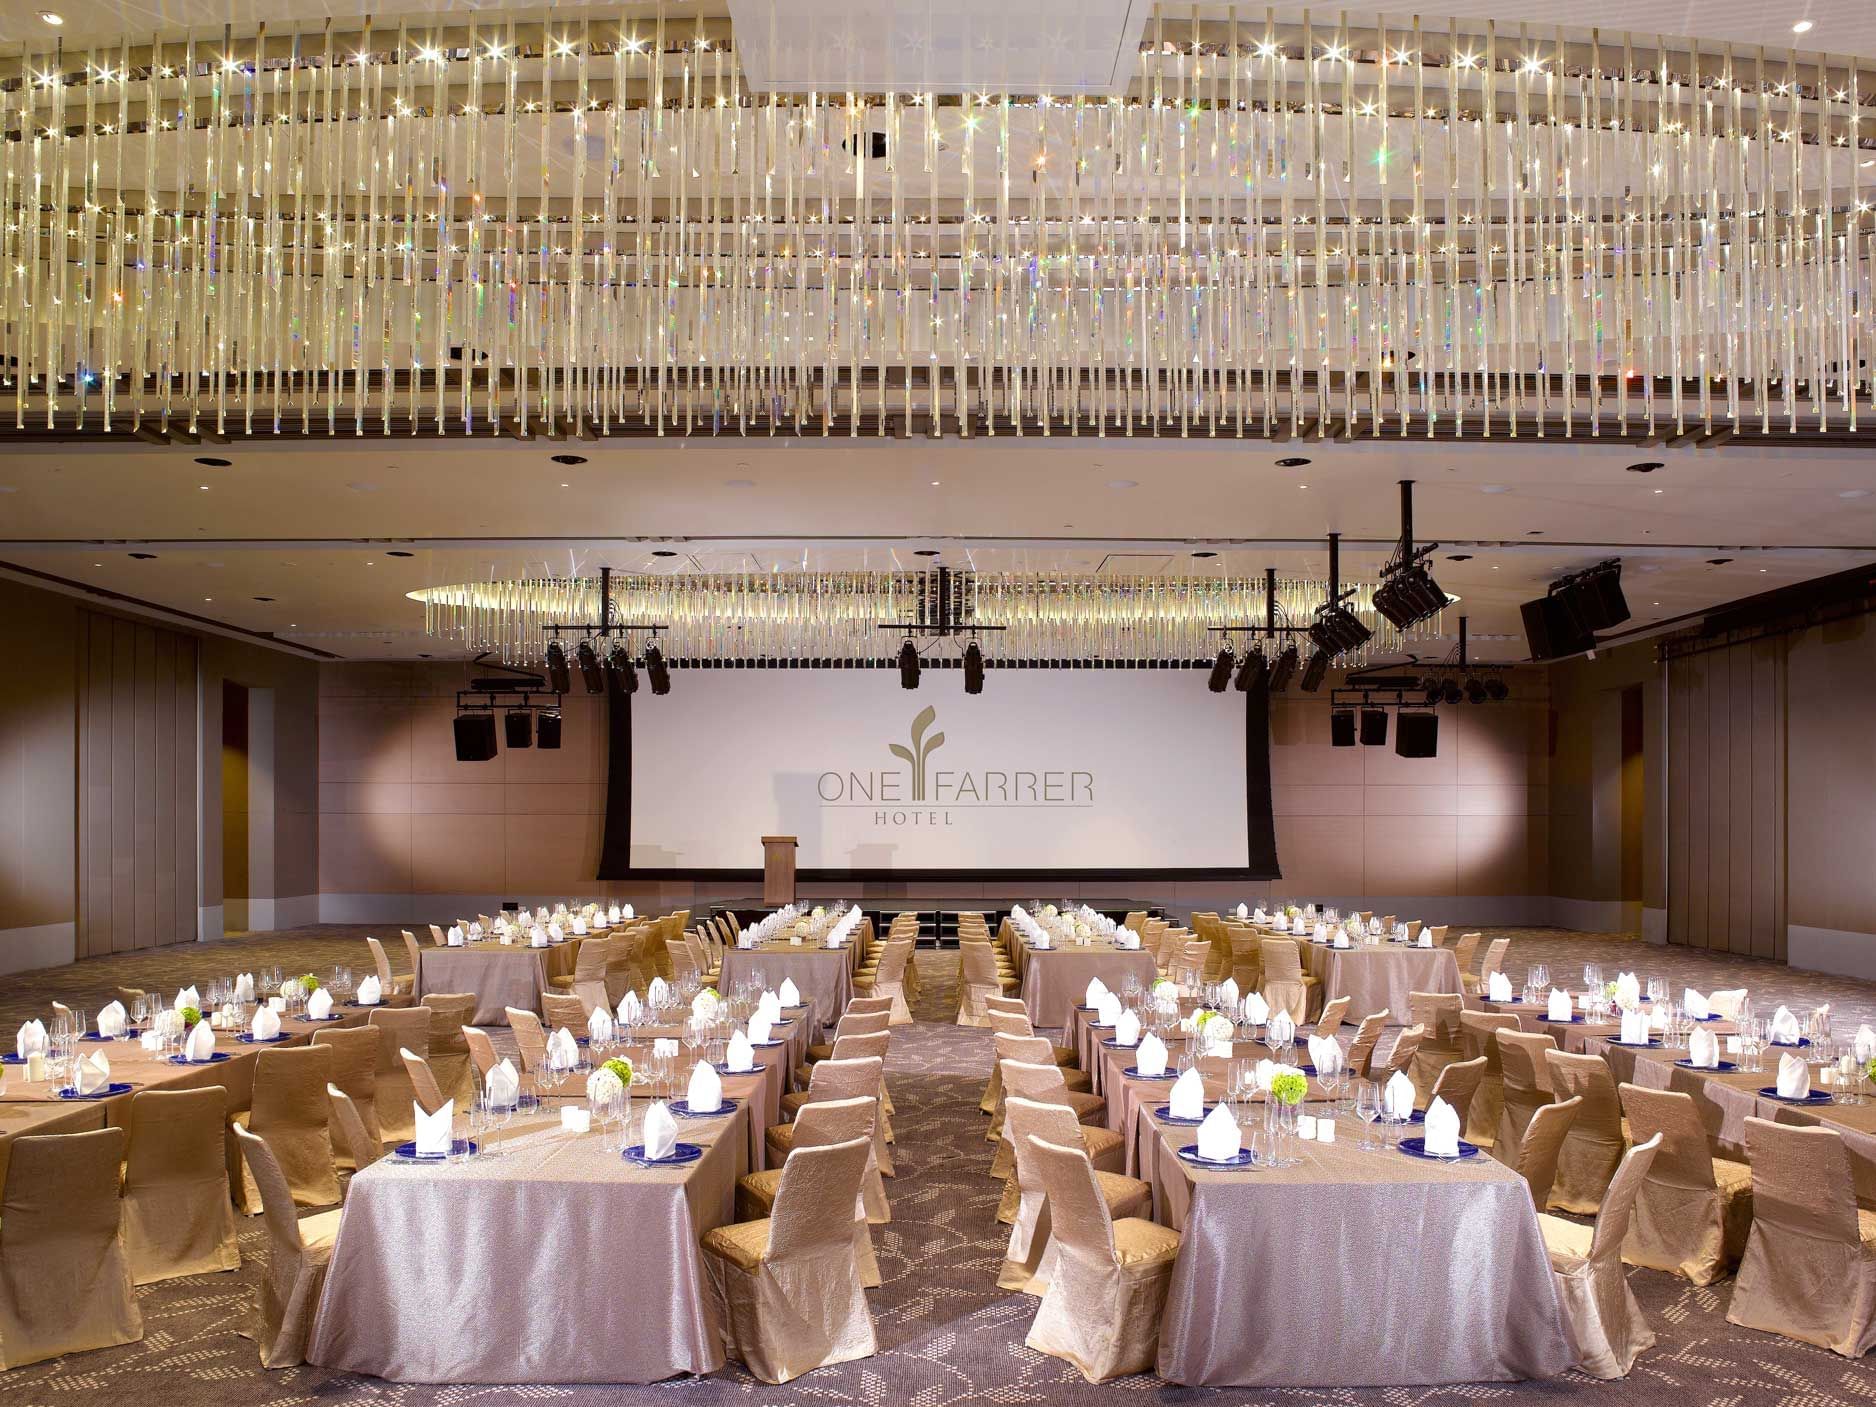 Interior of The Grand Ballroom at One Farrer Hotel